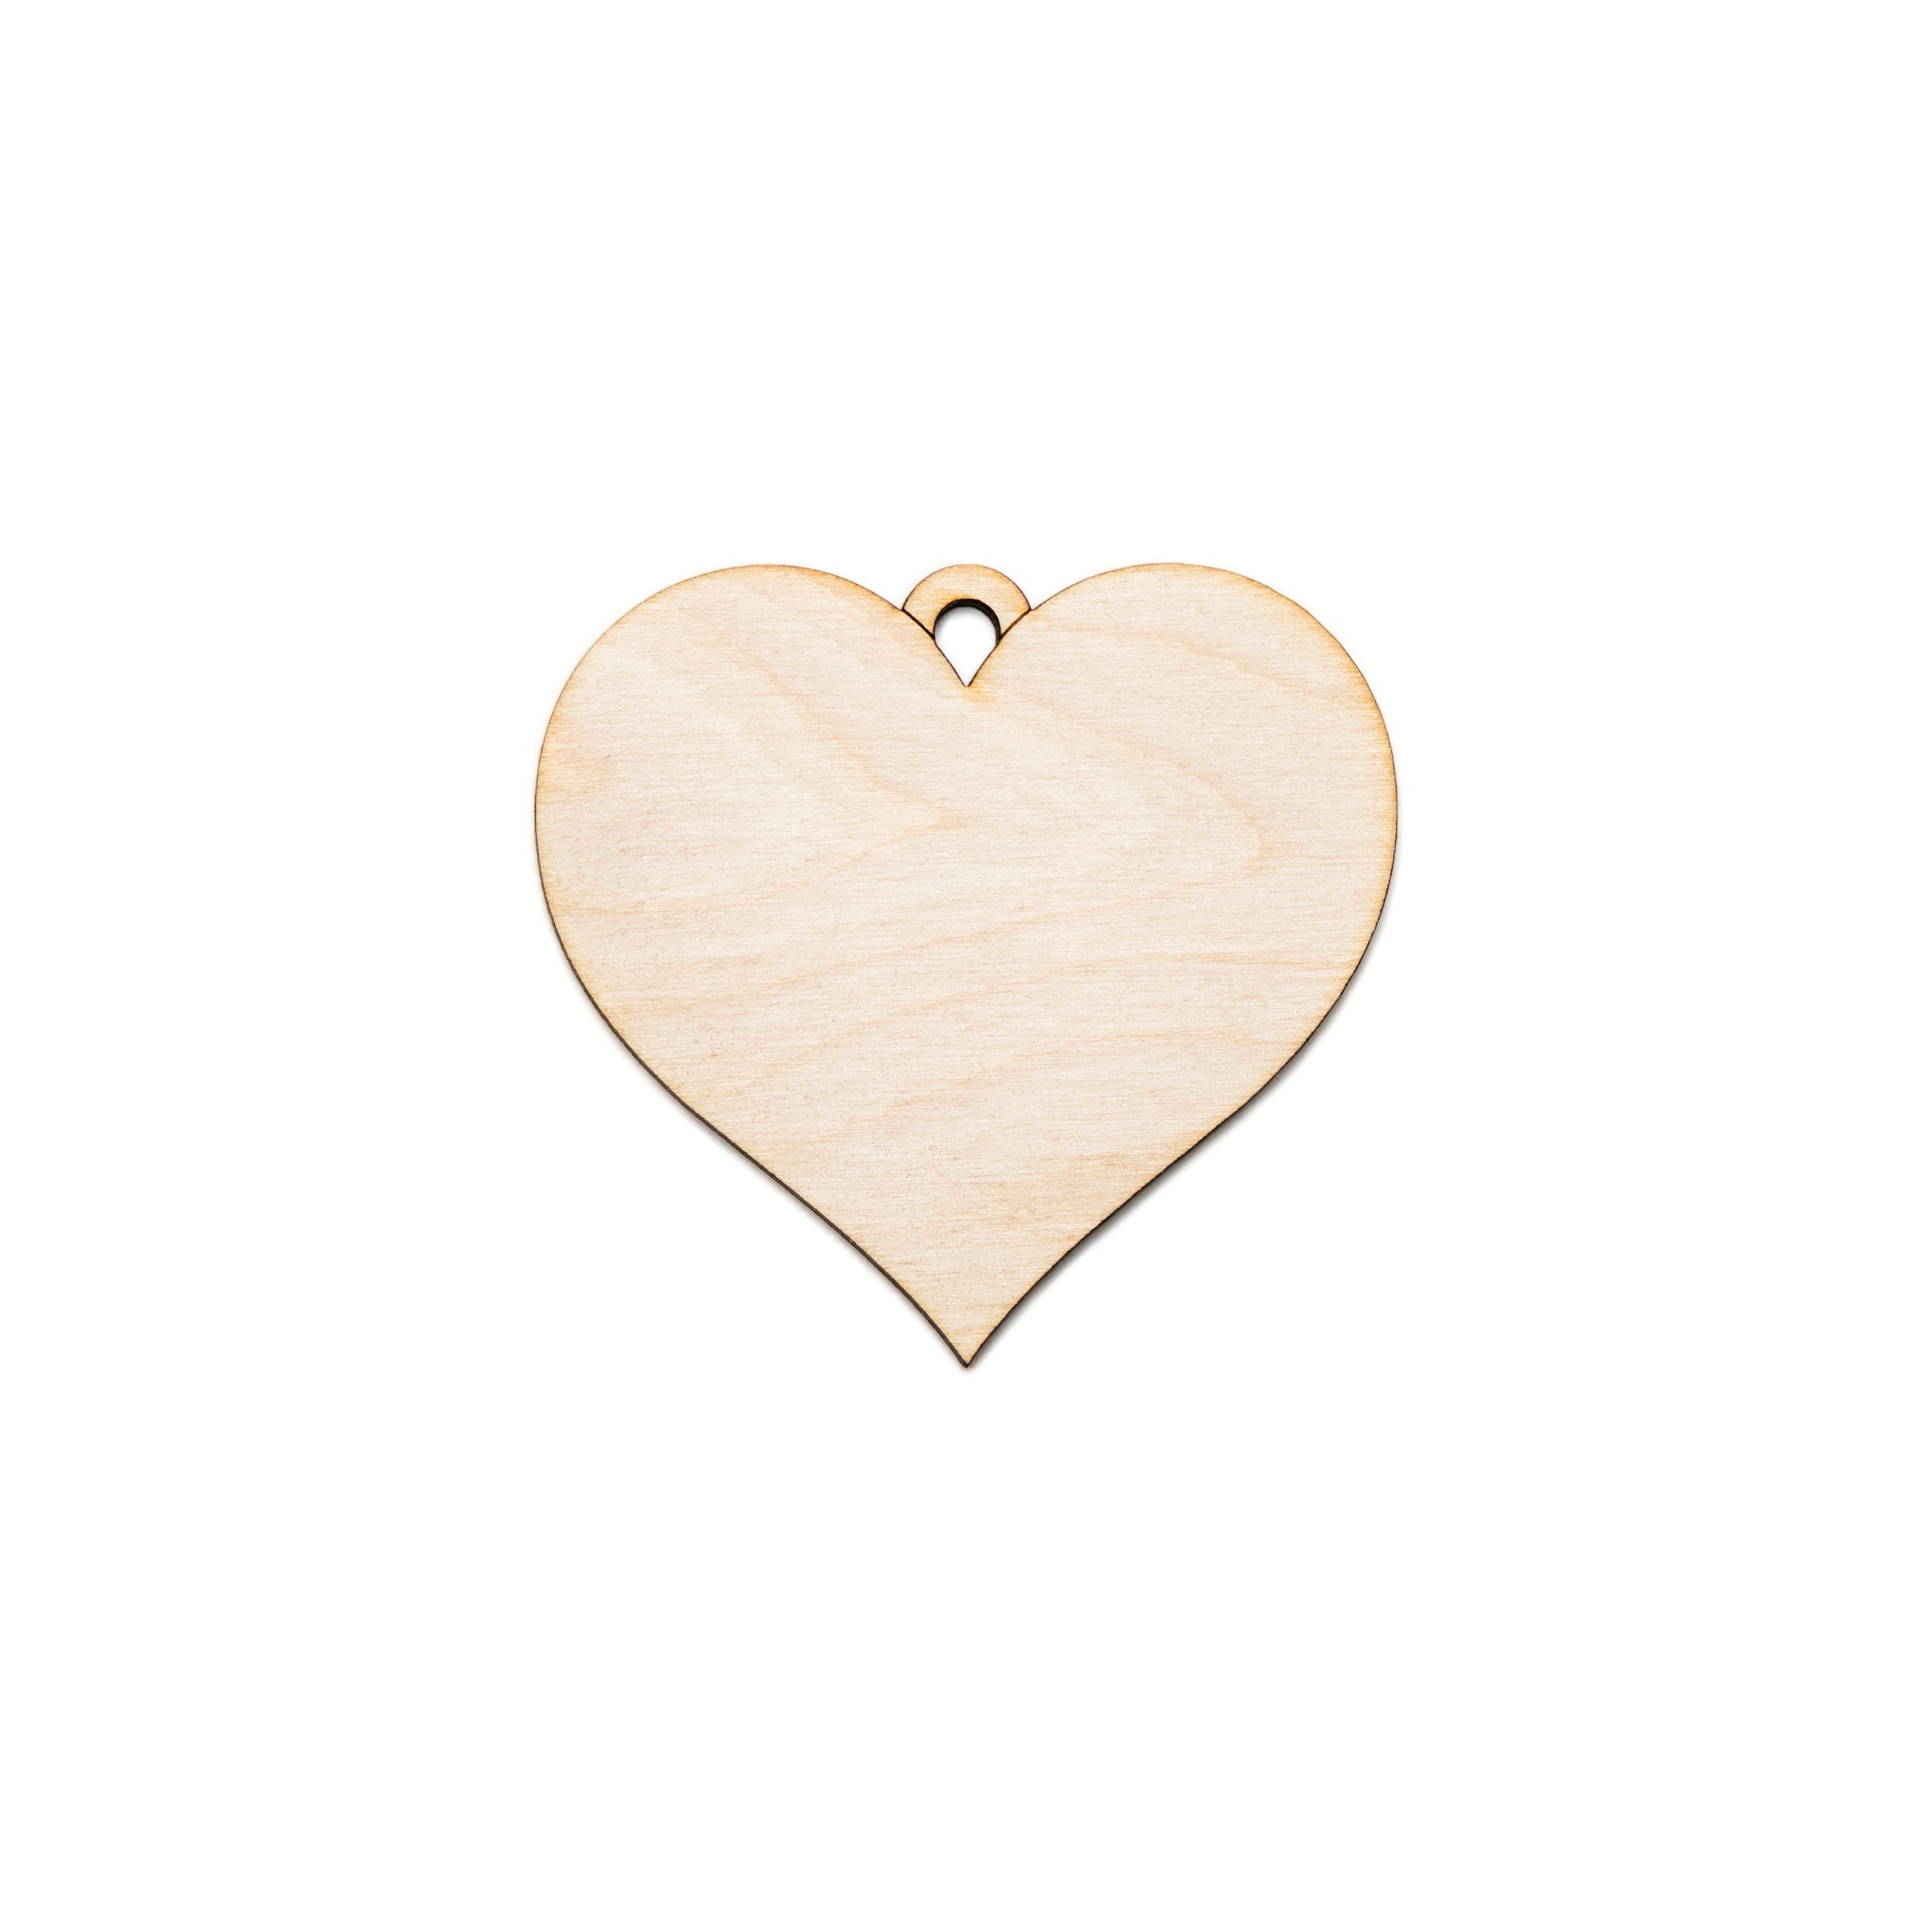 Wood Hearts Hole. Unfinished 4 Inches With a Heart Hole Set of 10, Wood  Heart, Holiday Craft Supplies, Crafts, Kid DIY Shapes, Paintable 